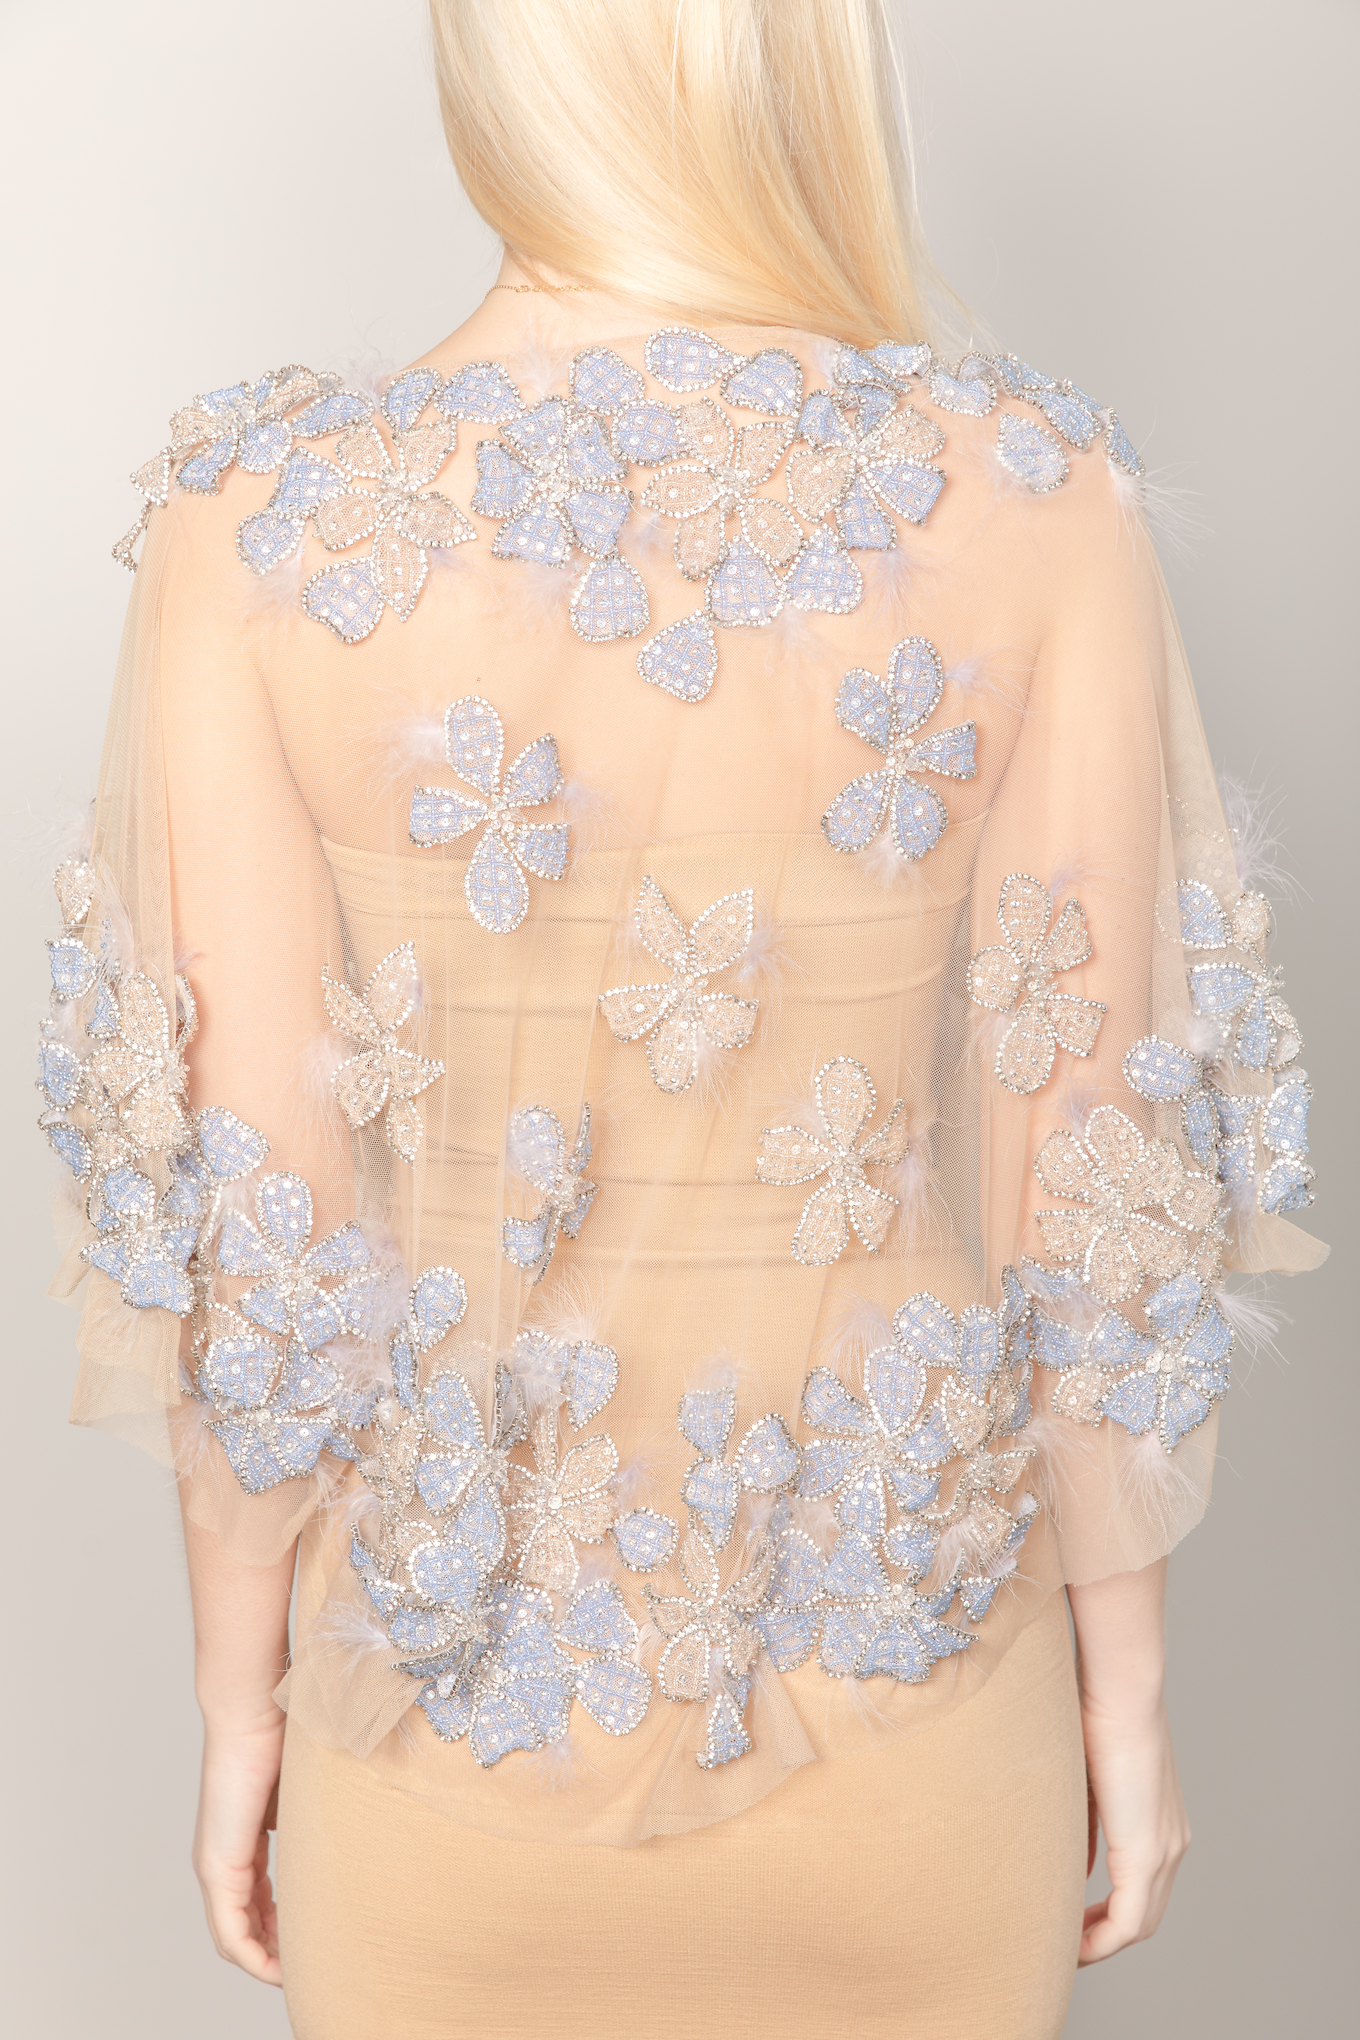 Custom couture beaded cape mini made to order featuring bleu and pastel crystal beading with little feather details showing the back length